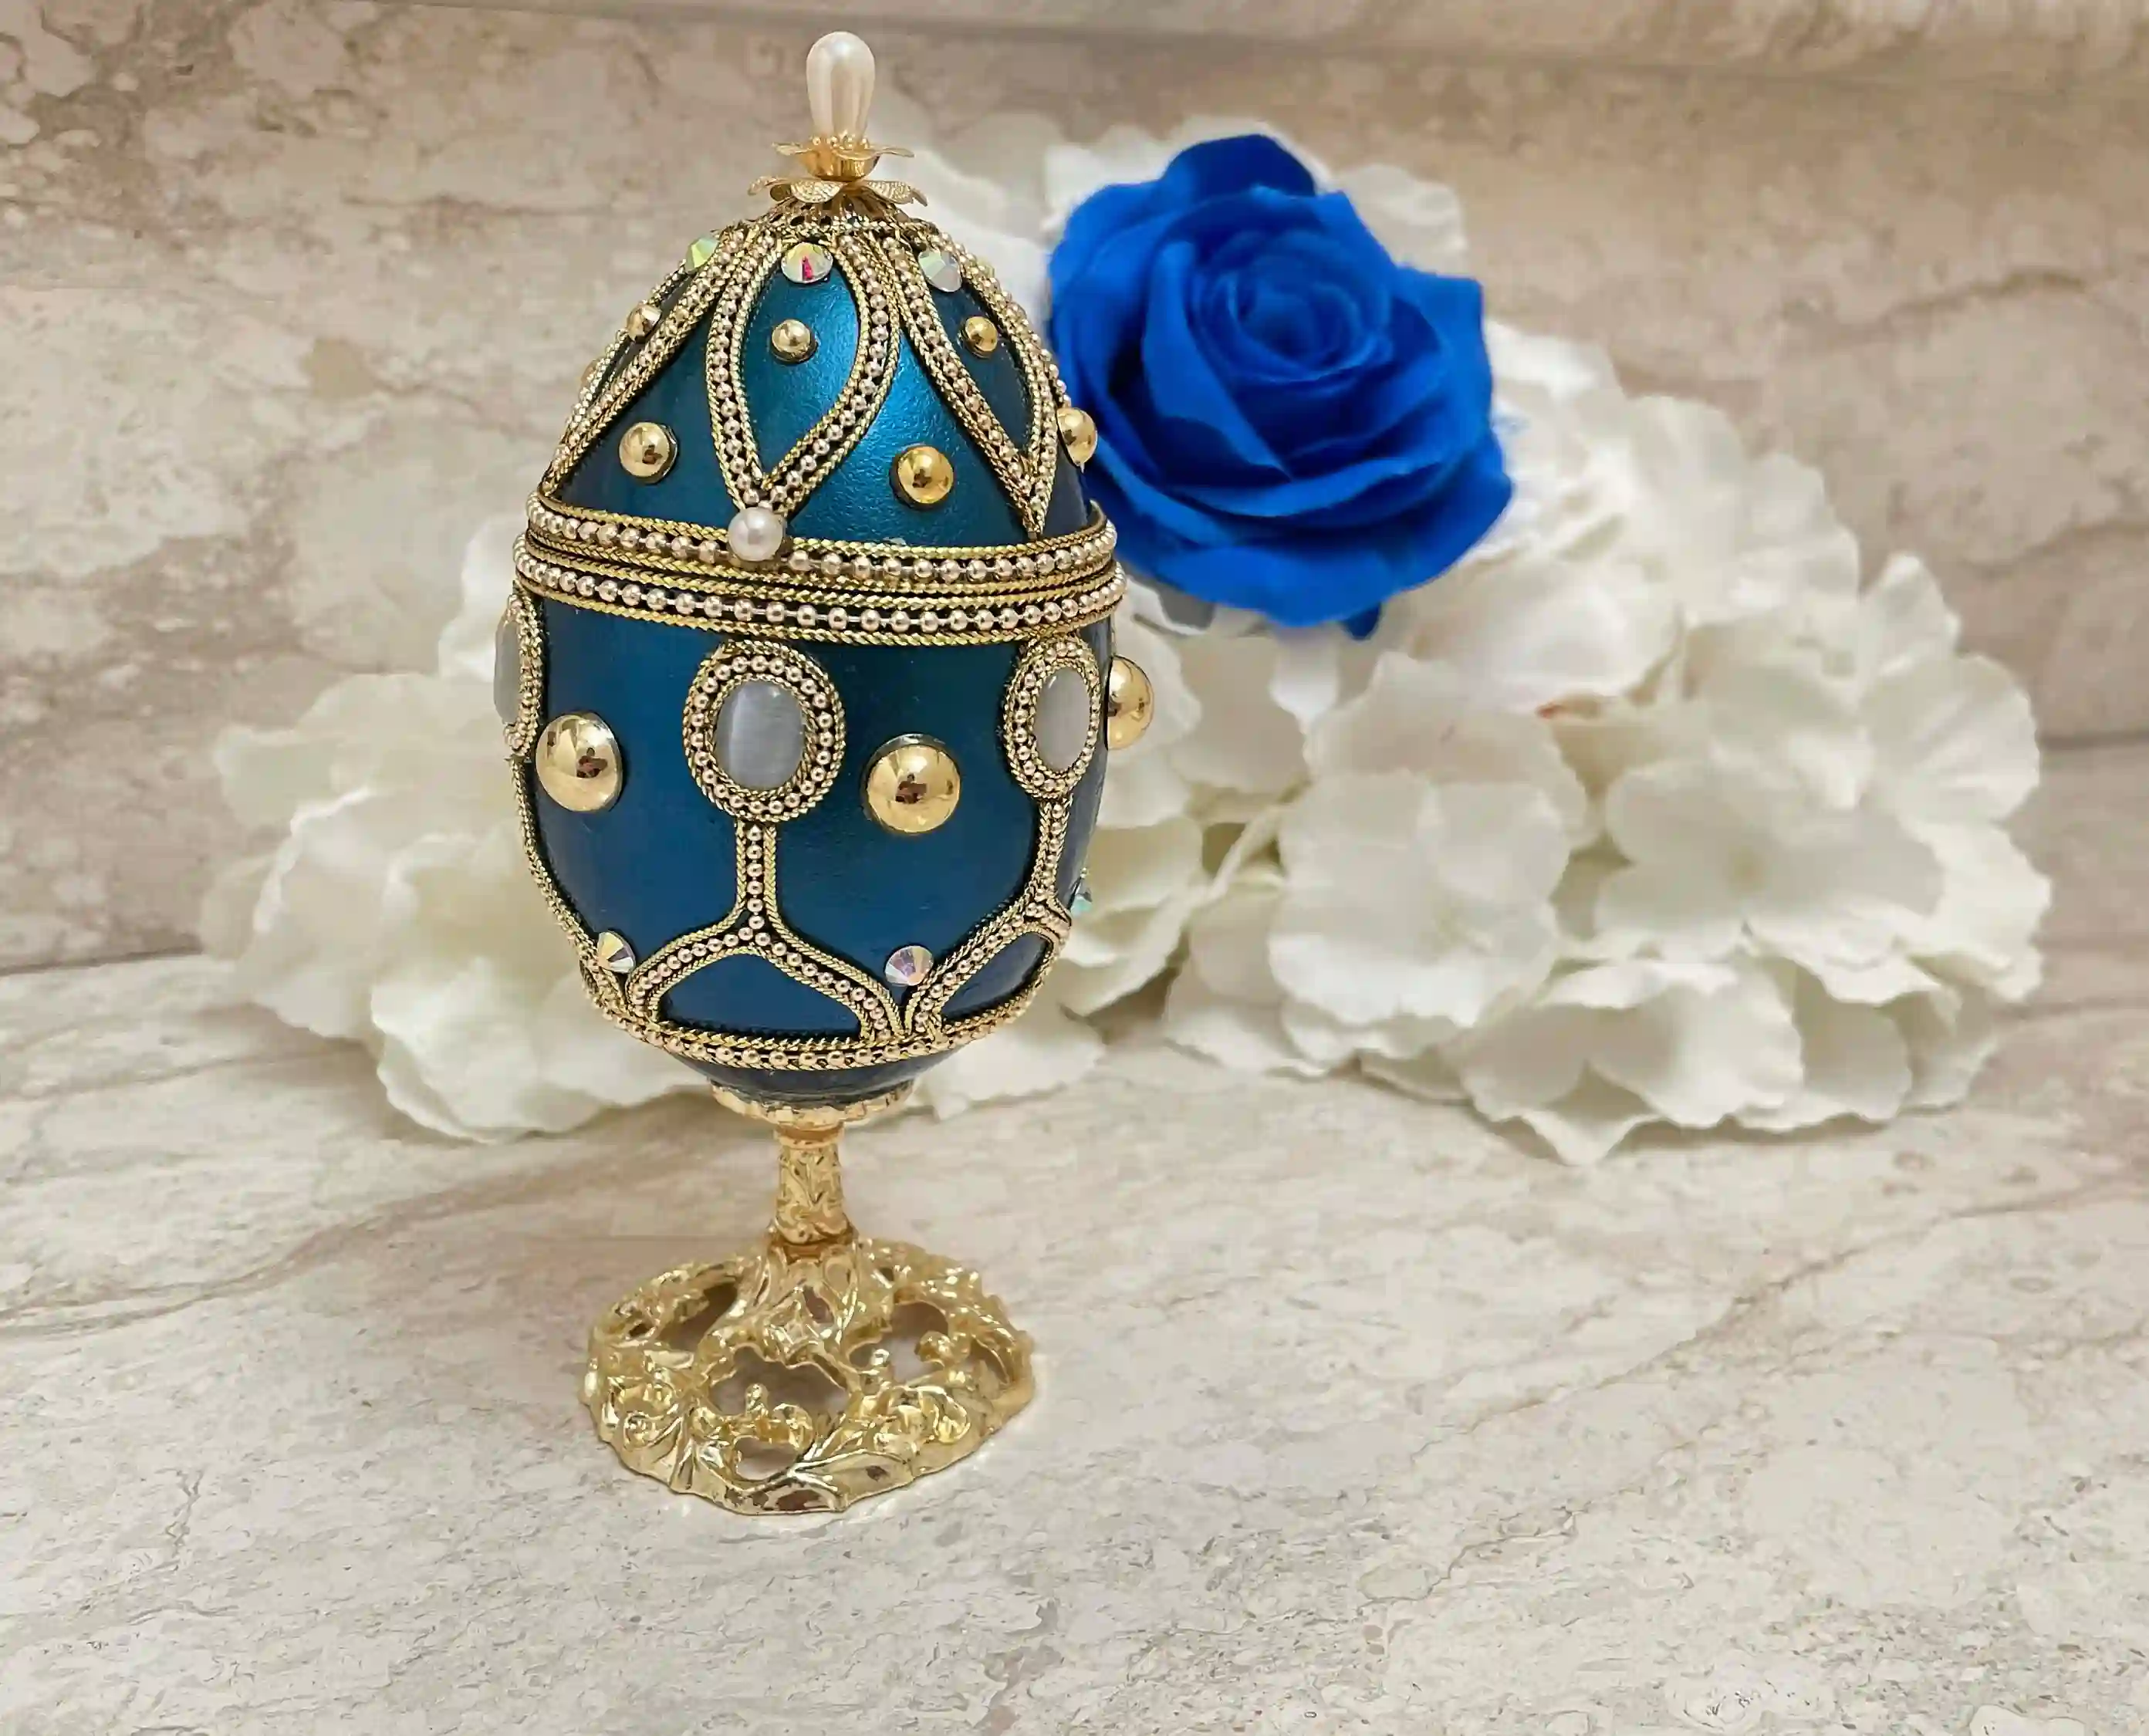 One of A Kind Blue Gifts, Faberge Egg VINTAGE, Faberge Egg style , HANDCARVED Natural Egg, Faberge Ornament Decorative Faberge Egg Music Box 